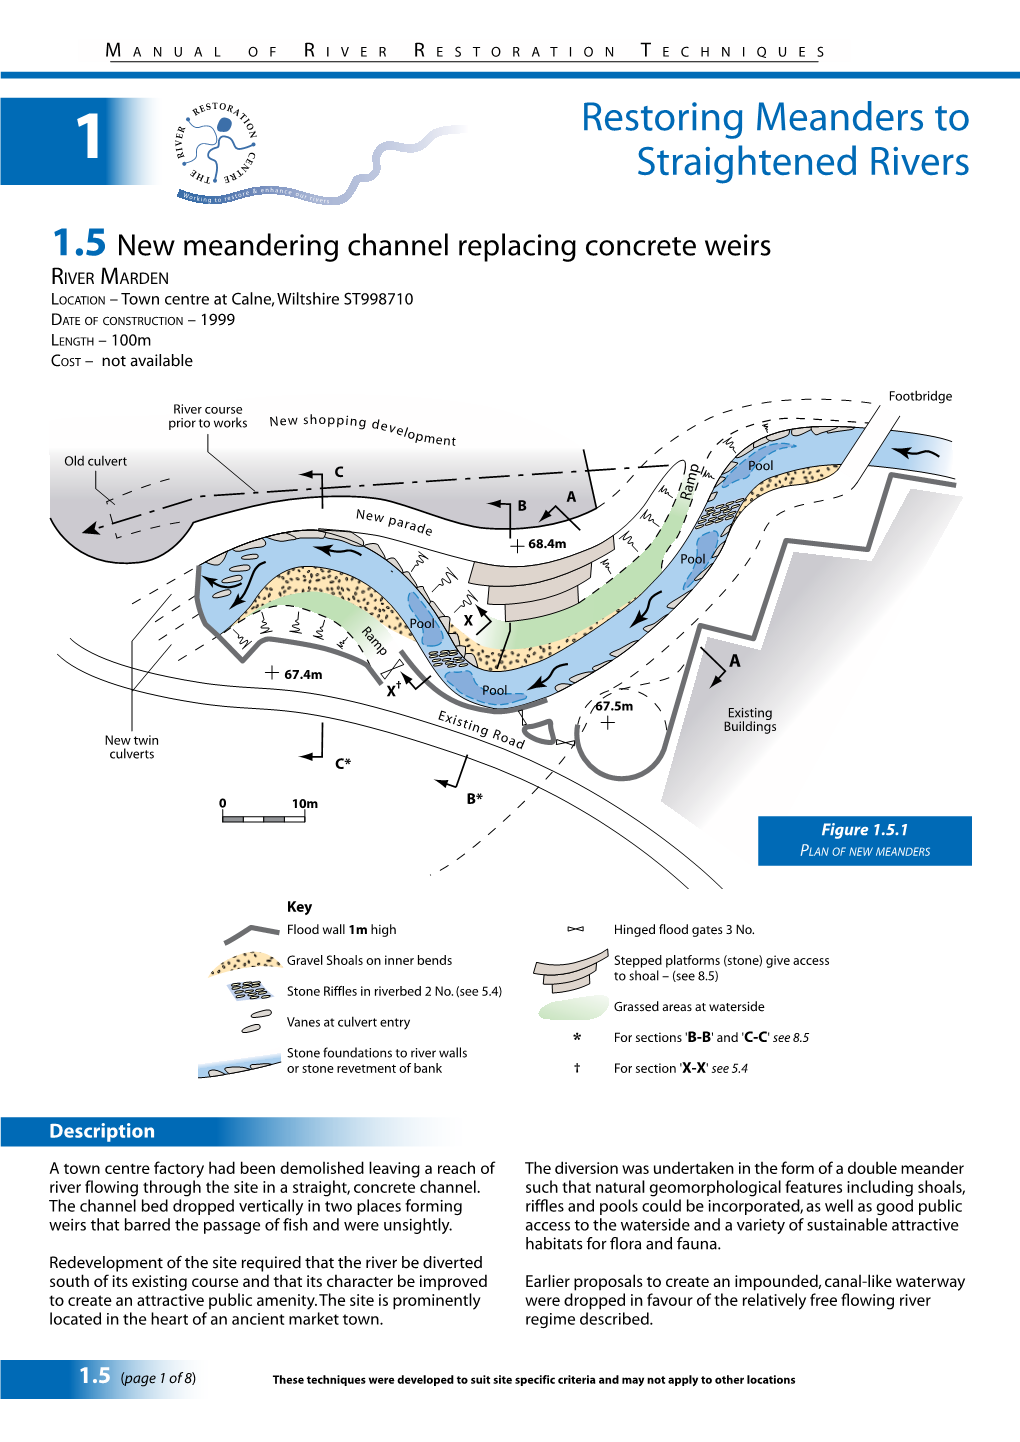 Restoring Meanders to Straightened Rivers 1 Design